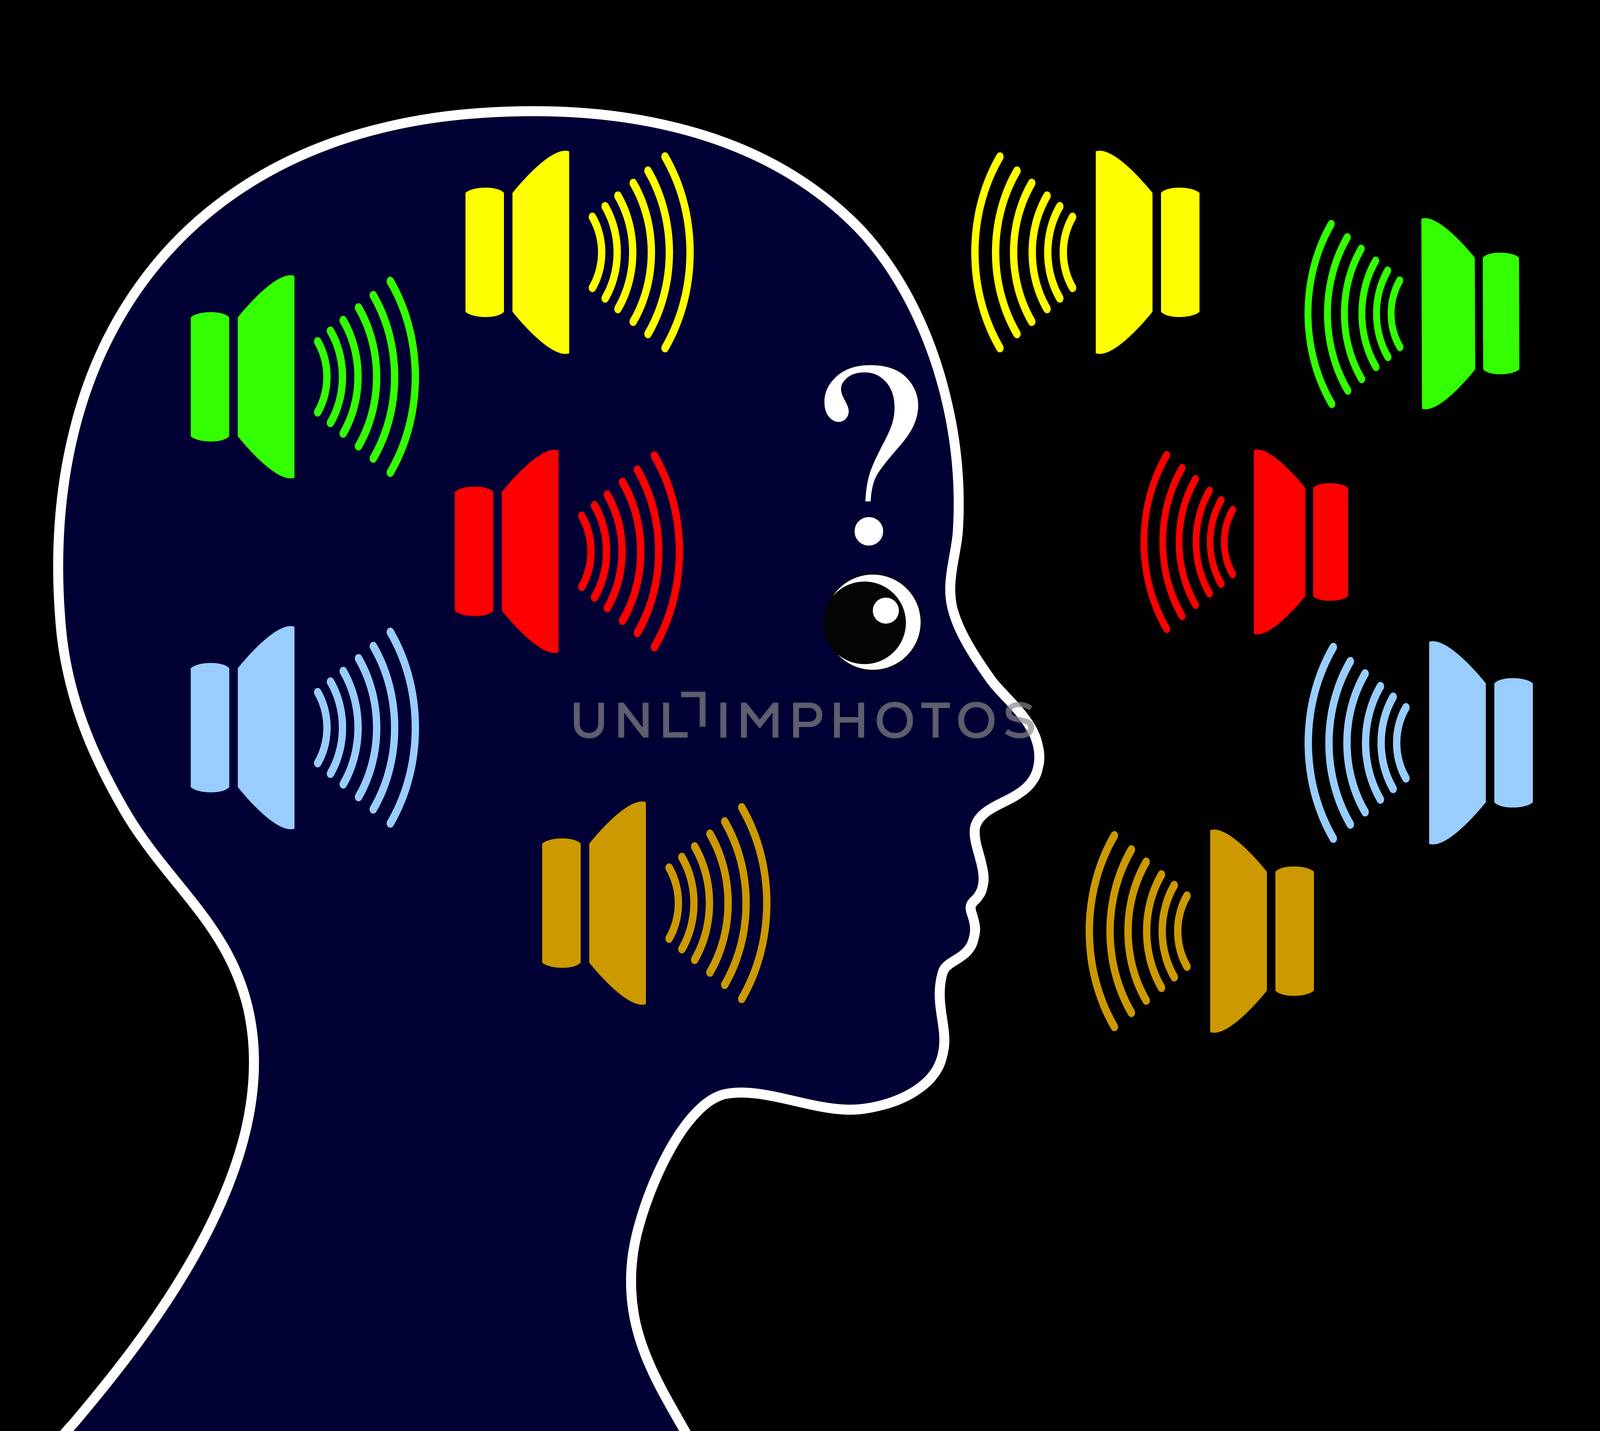 Schizophrenic person may hear voices other people do not hear and get paranoid